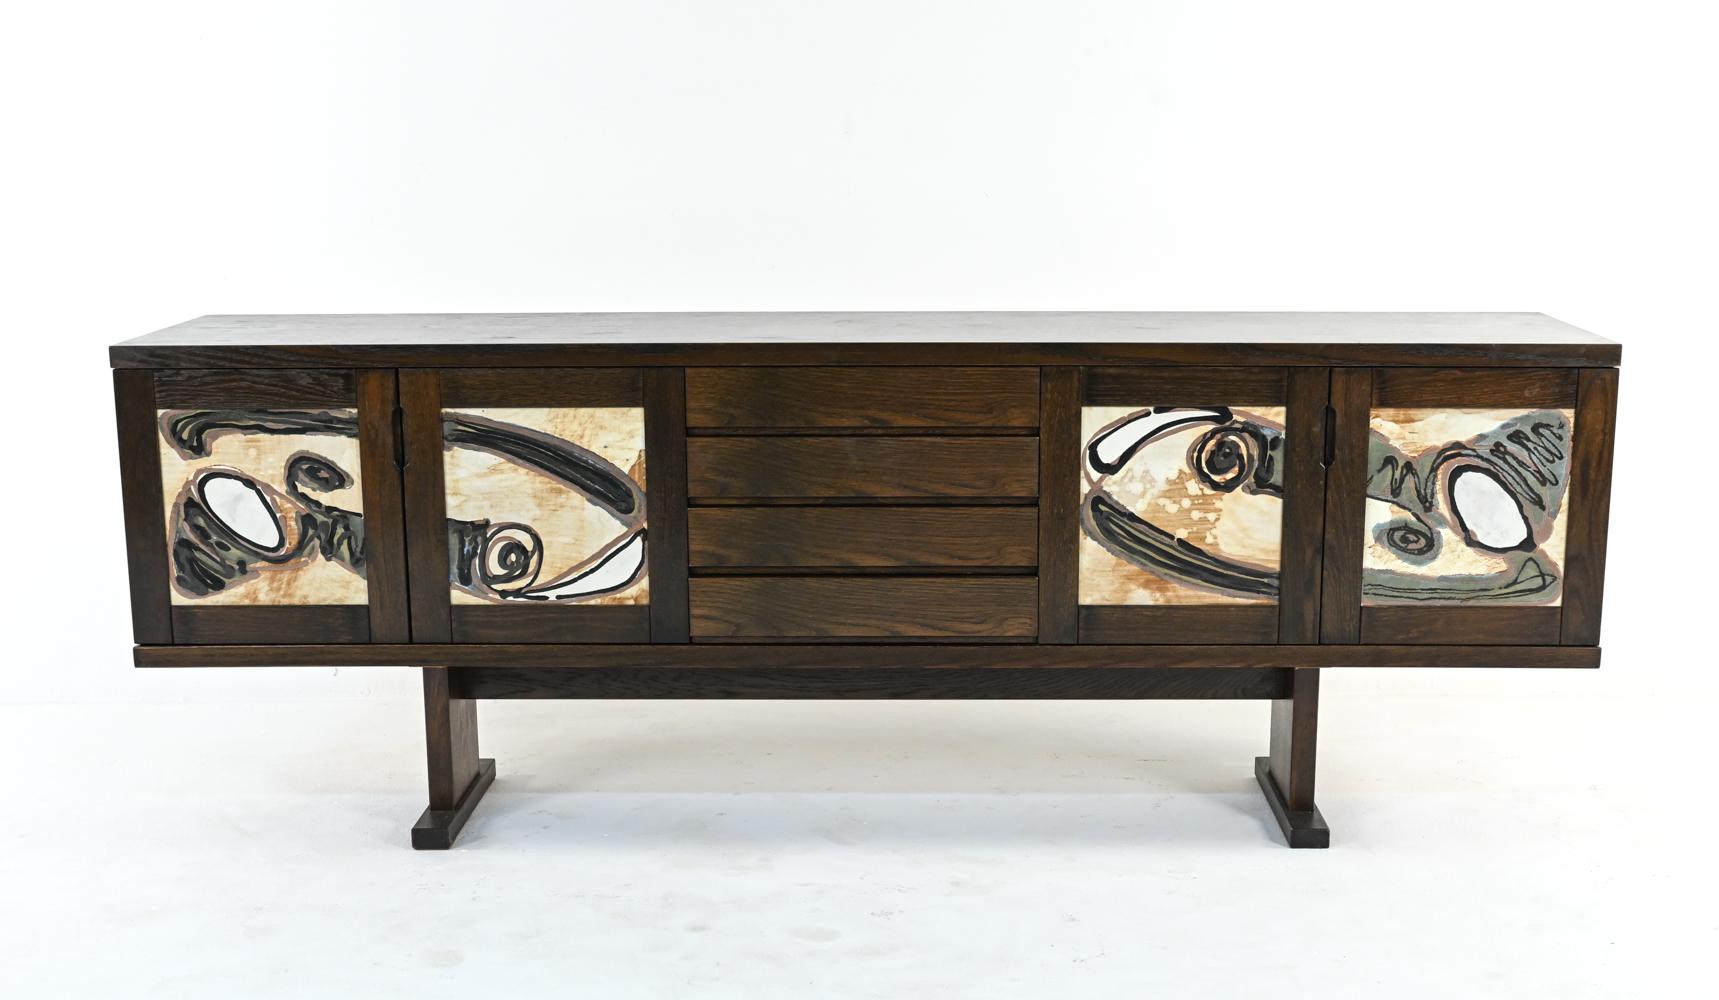 A fabulous Danish modern sideboard in rich, dark stained oak veneer with a sturdy trestle base. Central drawers with integral recessed handles are flanked by two sets of cabinet doors, inset with stunning Ox Art organic-inspired abstract design